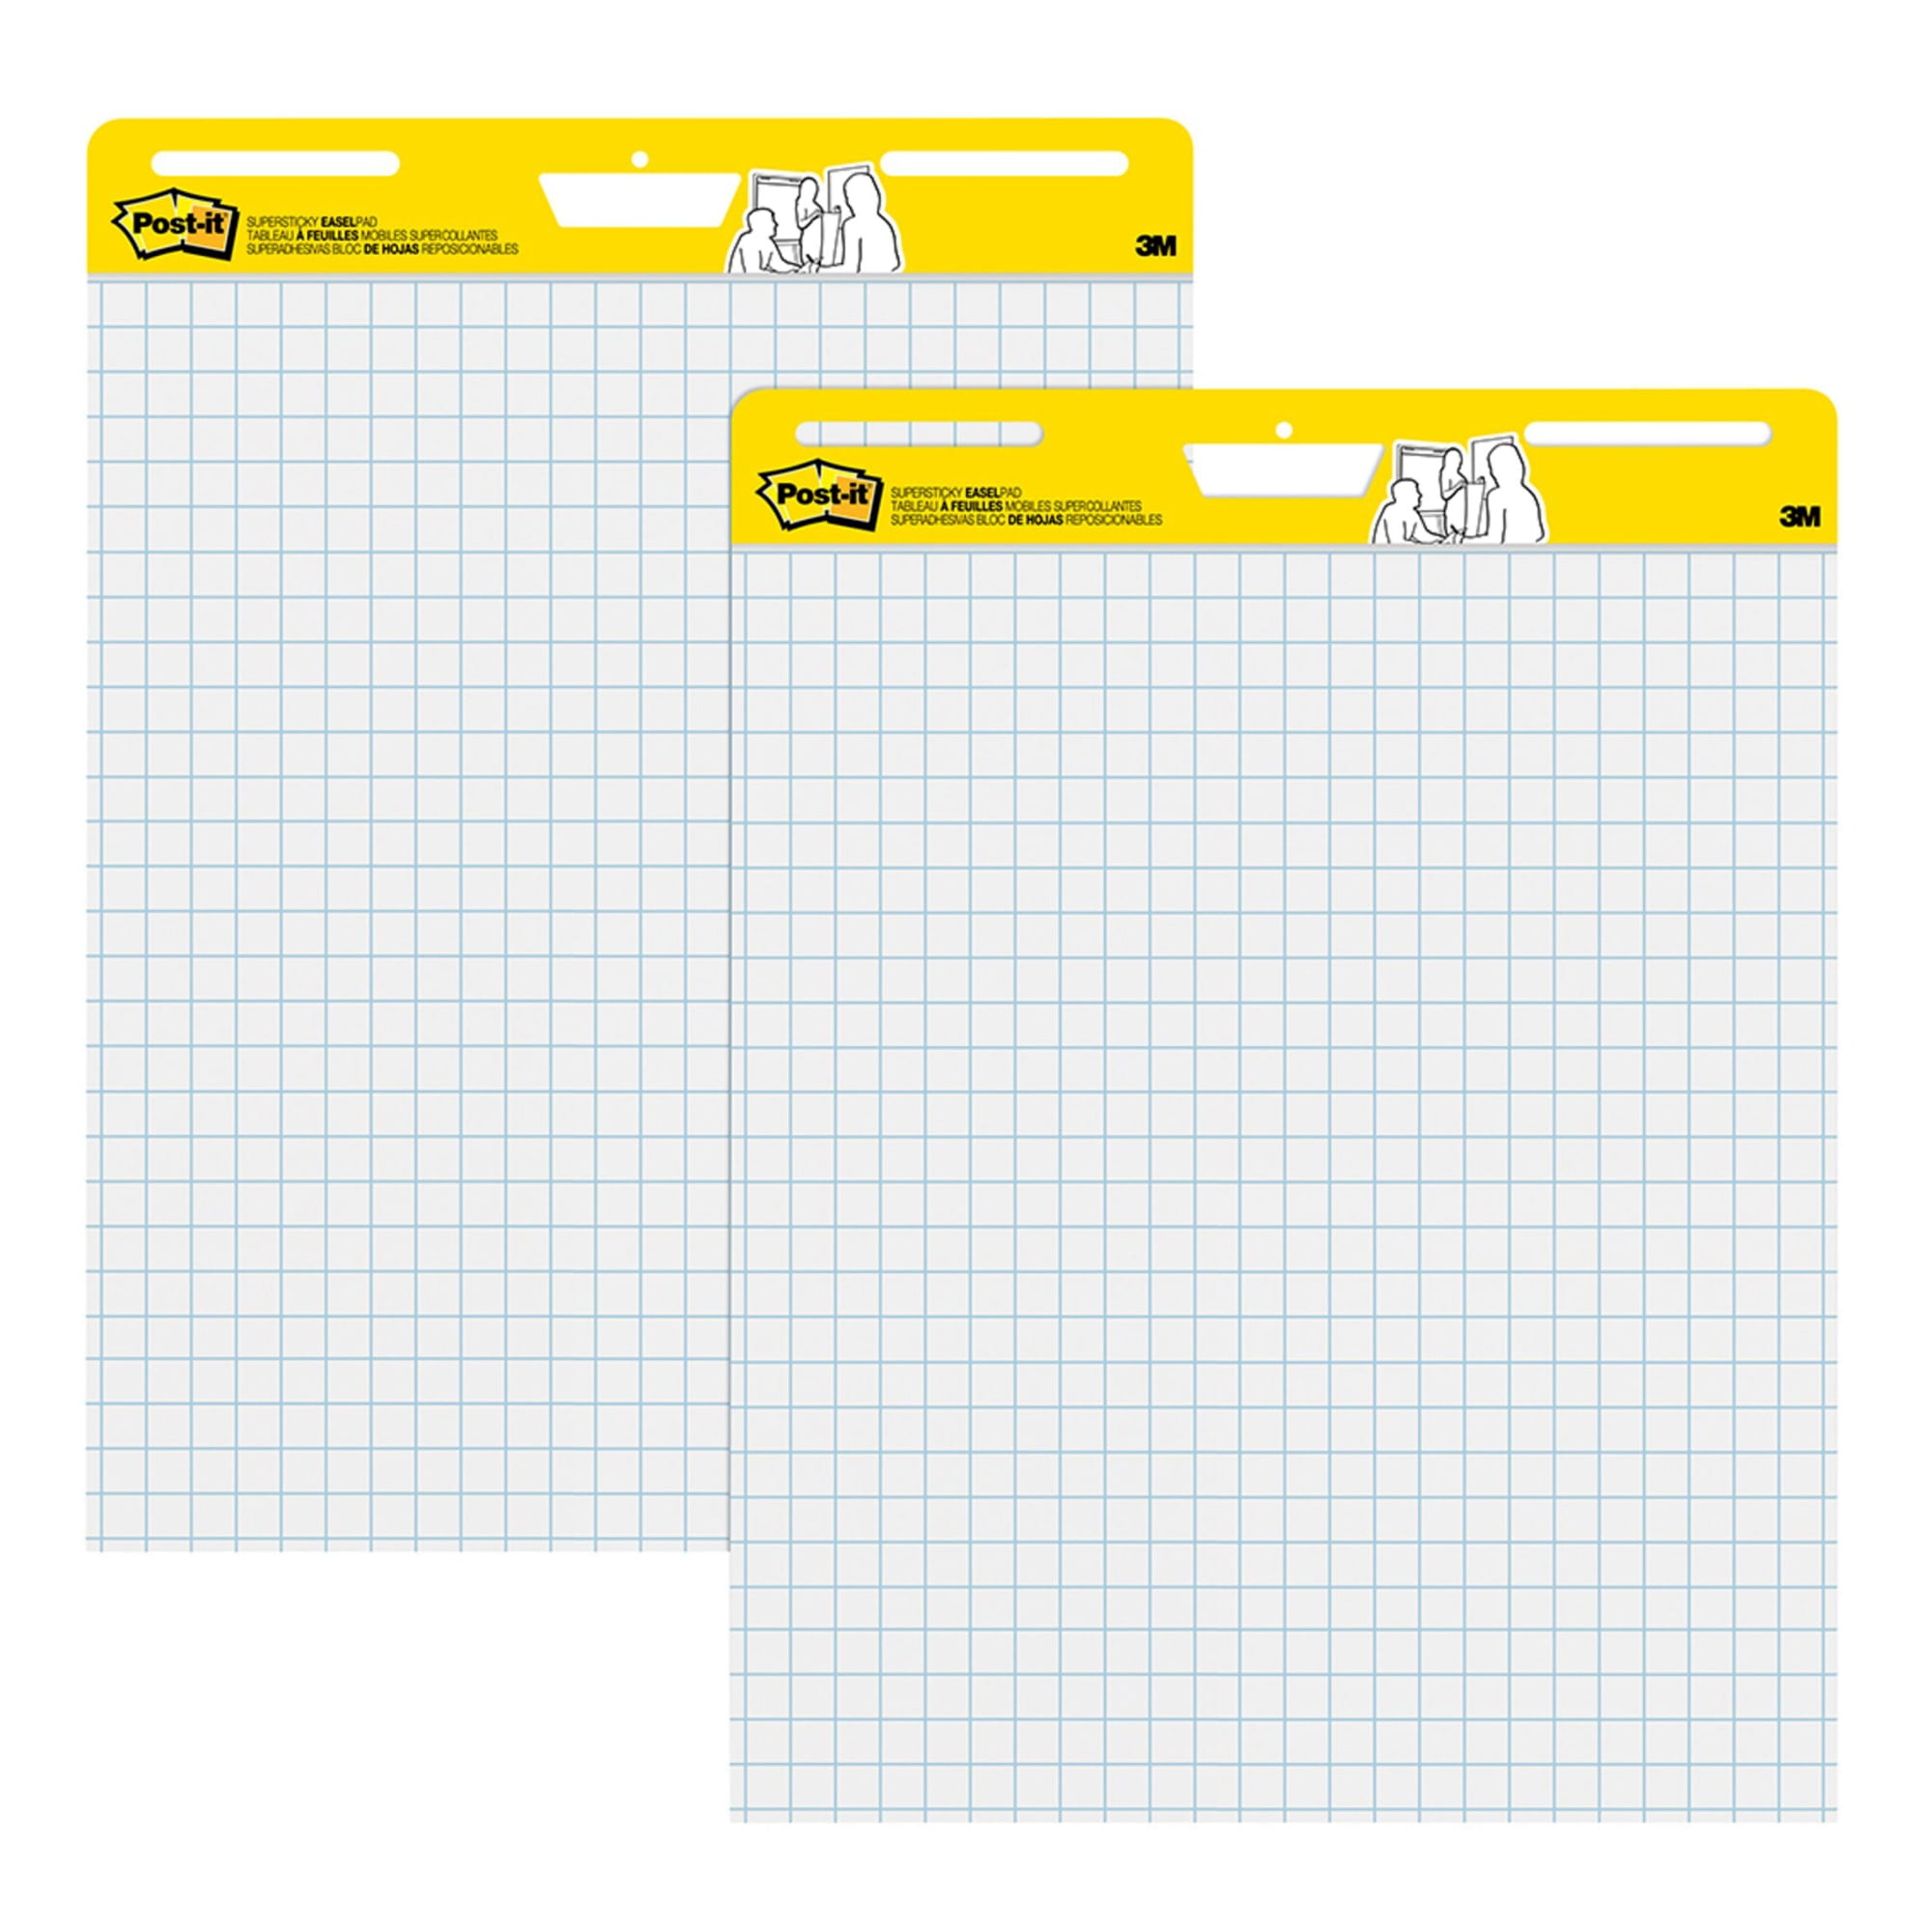 Post-it Super Sticky Easel Pad 25 x 30 White 3 Pads/Pack (559 VAD20 3PK)